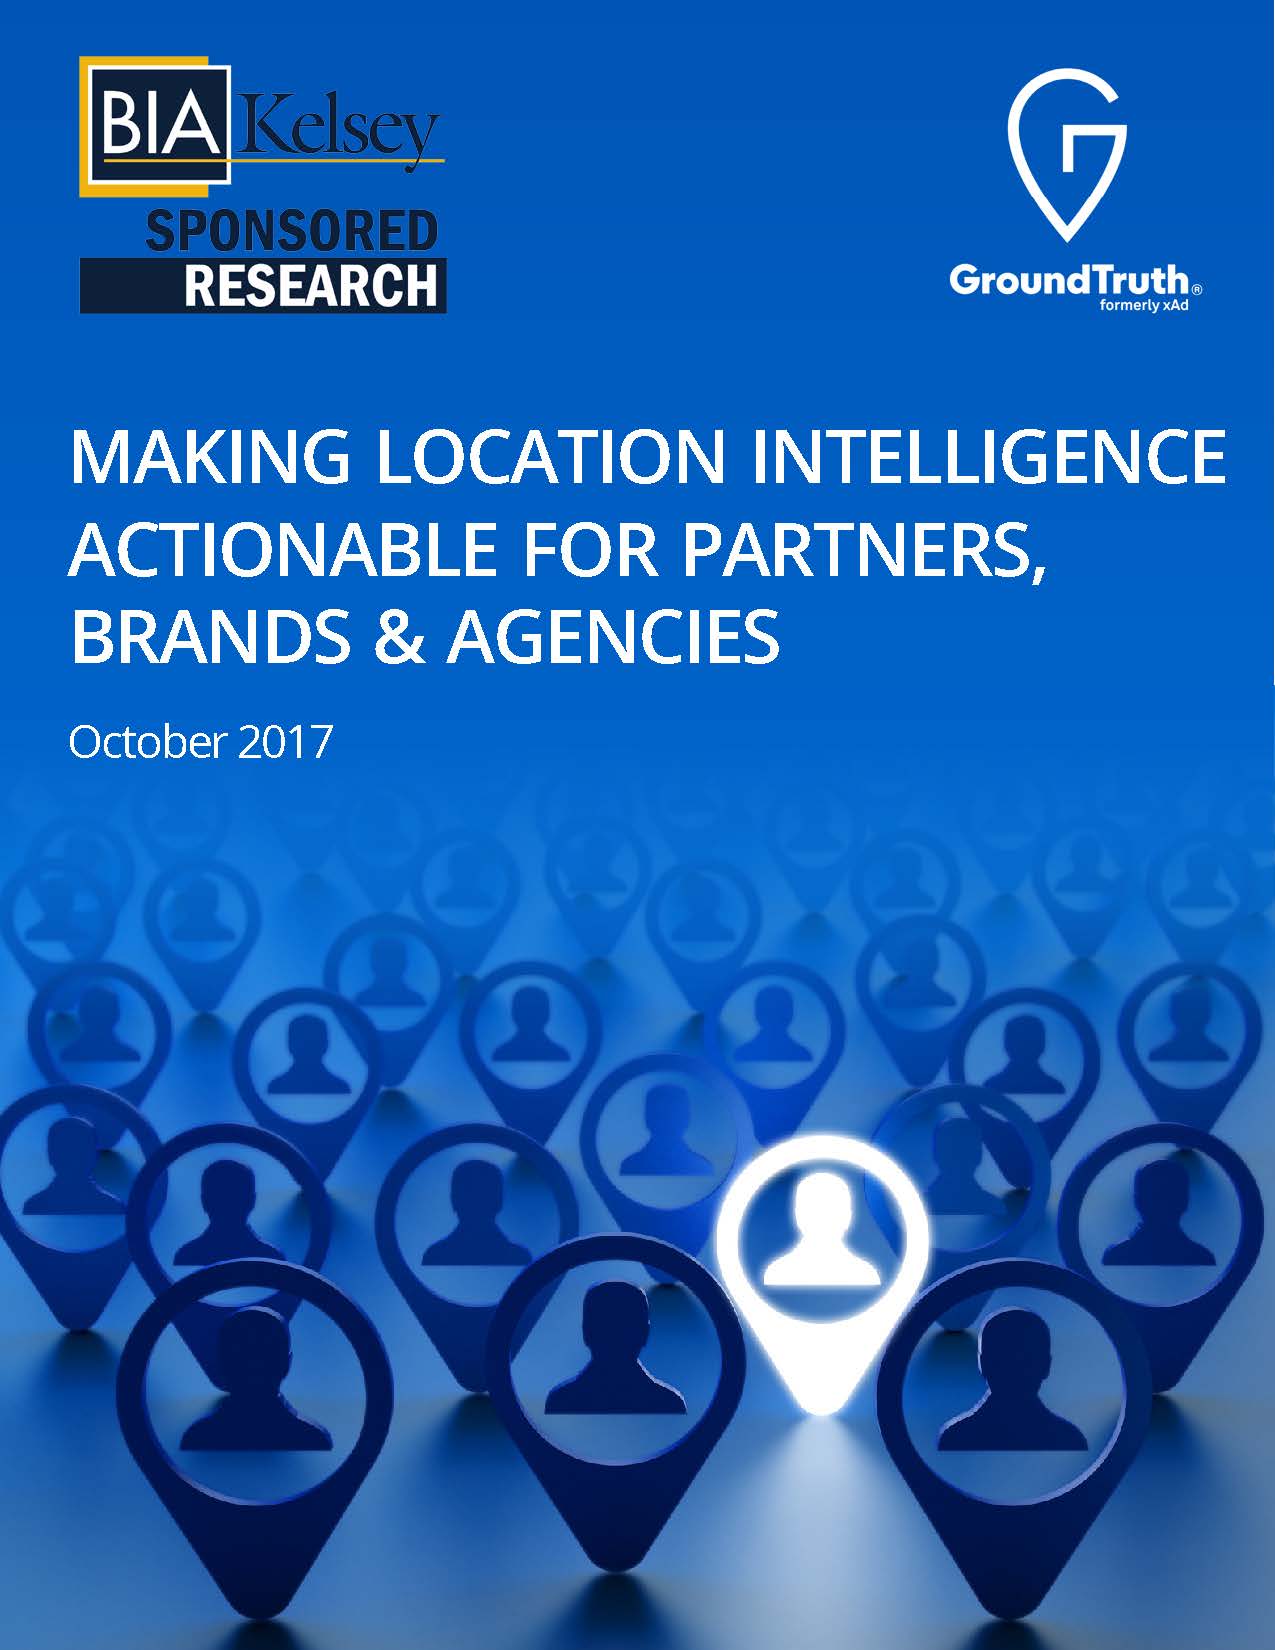 Making Location Intelligence Actionable For Partners, Brands & Agencies